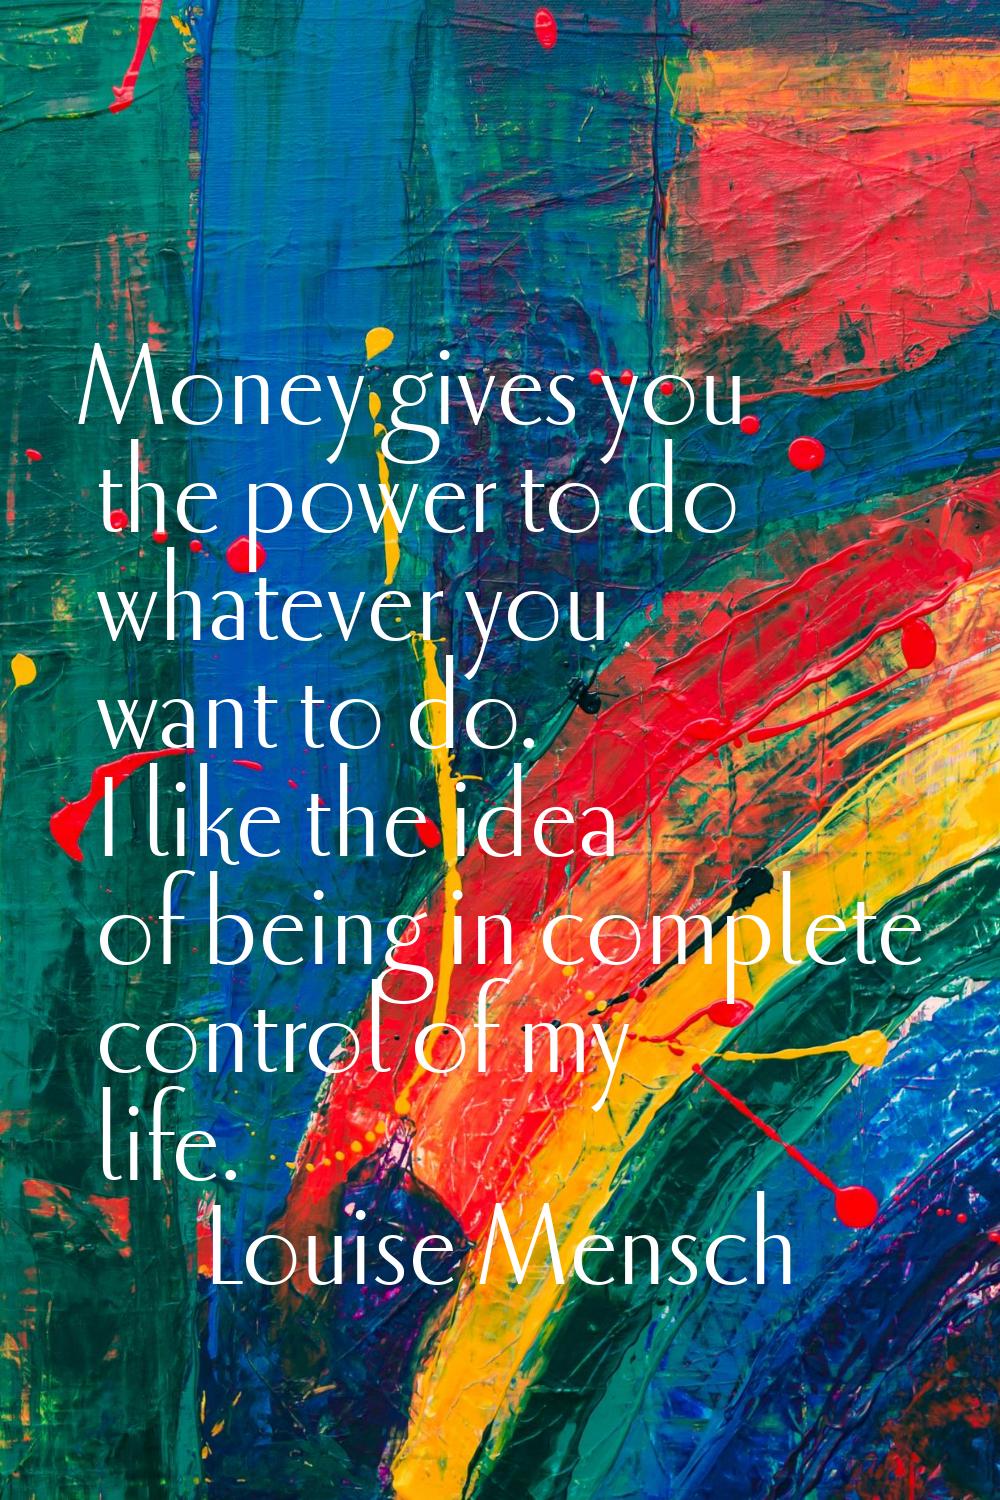 Money gives you the power to do whatever you want to do. I like the idea of being in complete contr